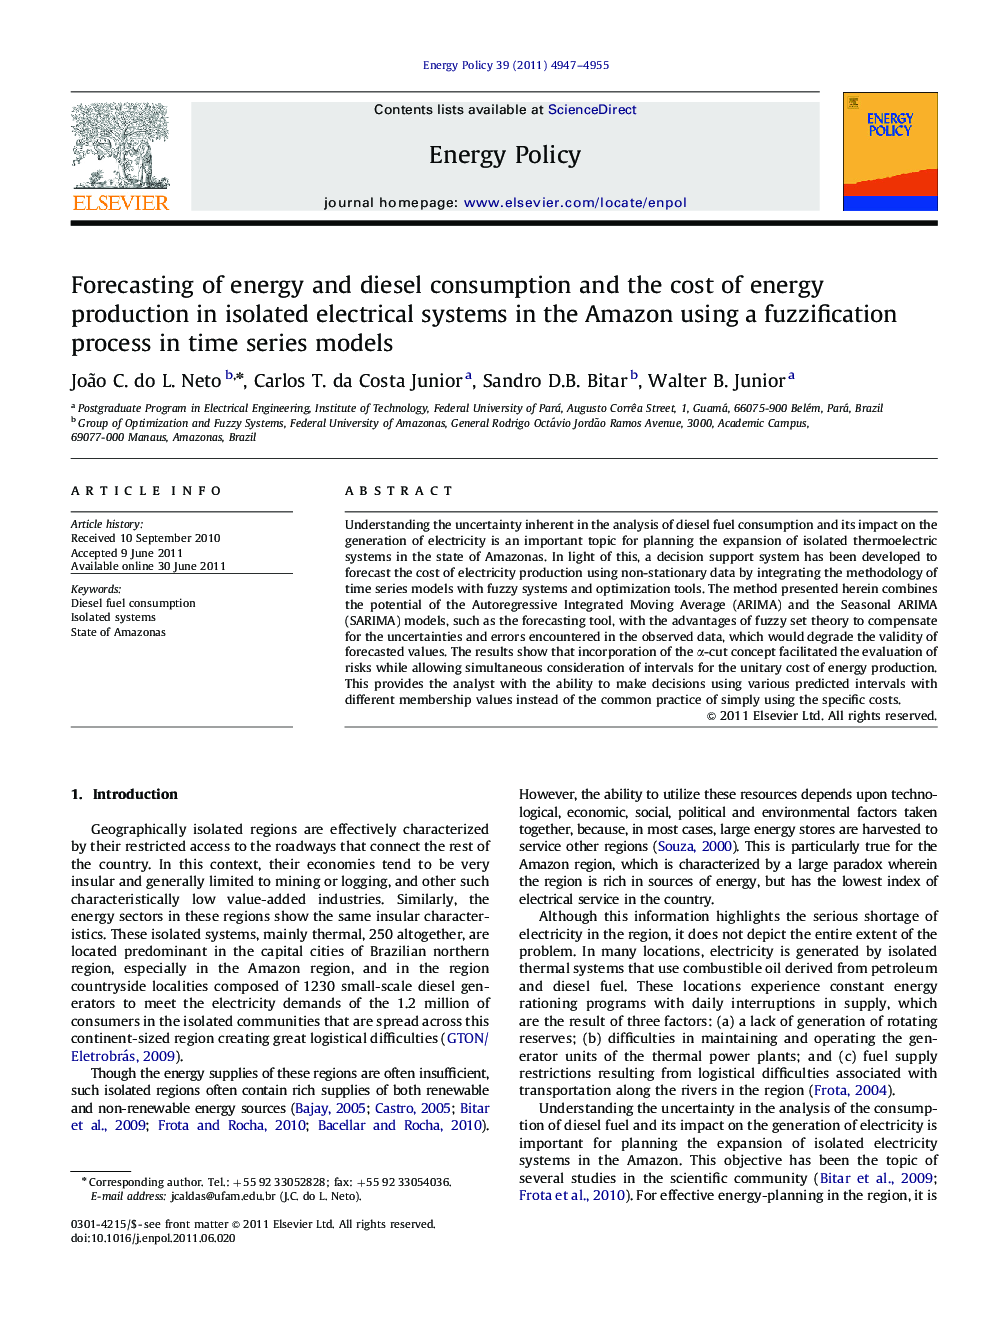 Forecasting of energy and diesel consumption and the cost of energy production in isolated electrical systems in the Amazon using a fuzzification process in time series models